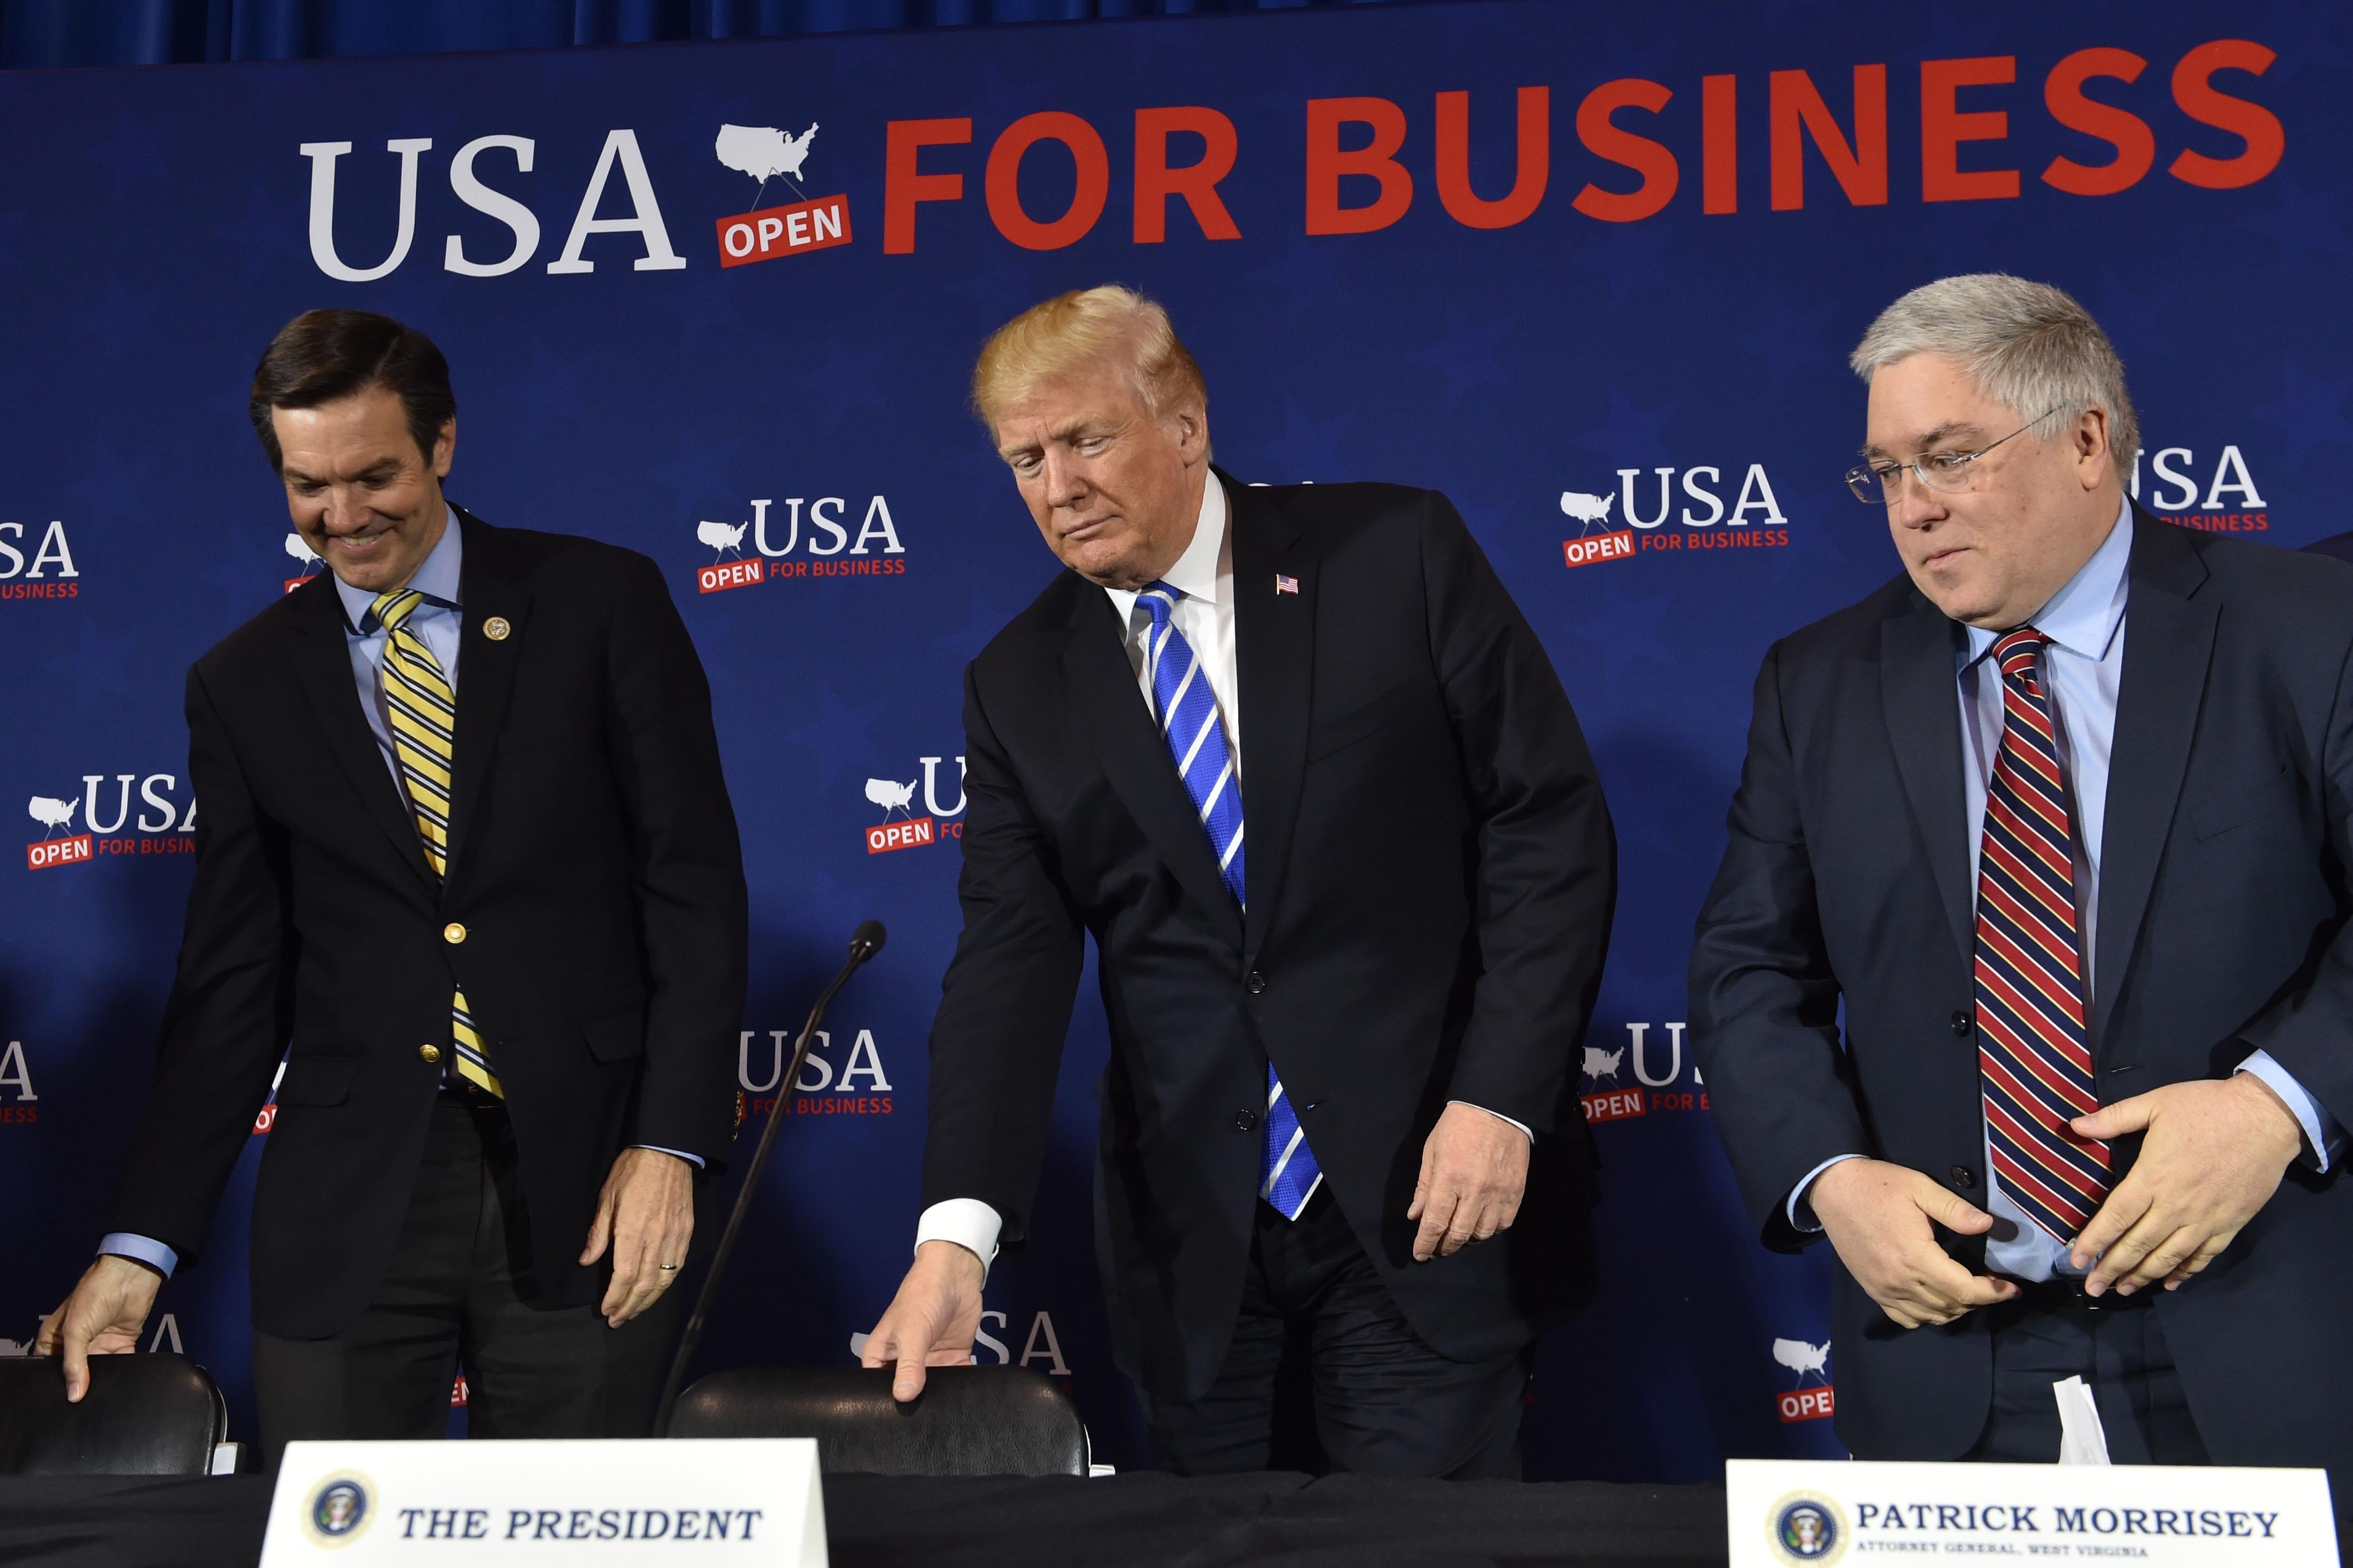 US President Donald Trump(C) arrives for a round table discussion on tax reform, at White Sulpher Springs Civic Center in White Sulpher Springs,West Virginia on April 5, 2018. 
Shown to his left is Rep. Evan Jenkins, and (R)West Virginia Attorney General Patrick Morrissey.   / AFP PHOTO / Nicholas Kamm        (Photo credit should read NICHOLAS KAMM/AFP/Getty Images)